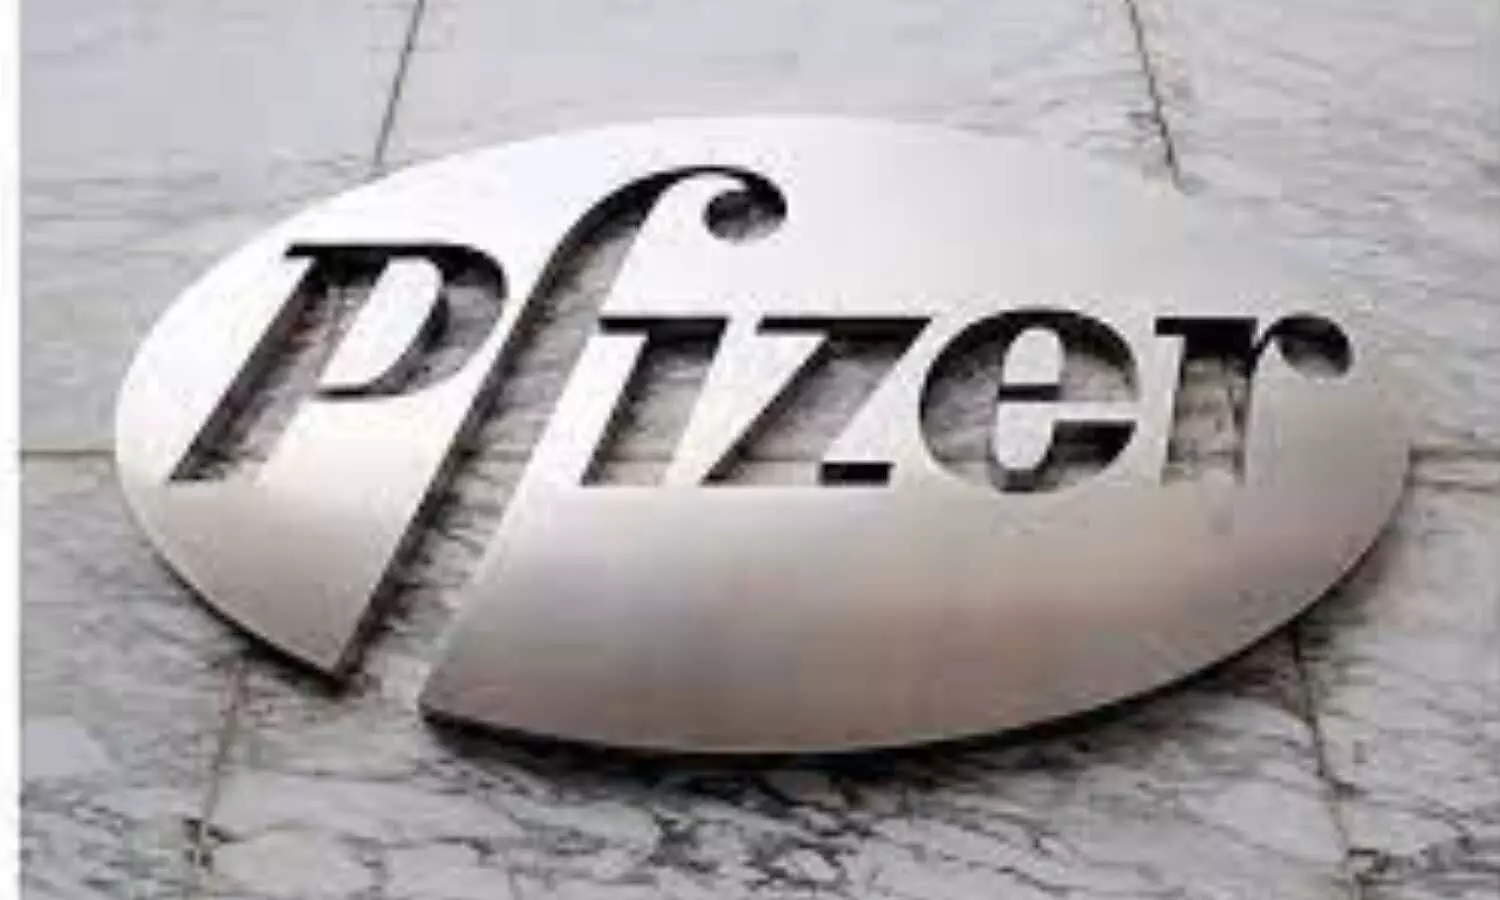 Pfizer Elranatamab gets USFDA Breakthrough Therapy Designation for Relapsed or Refractory Multiple Myeloma